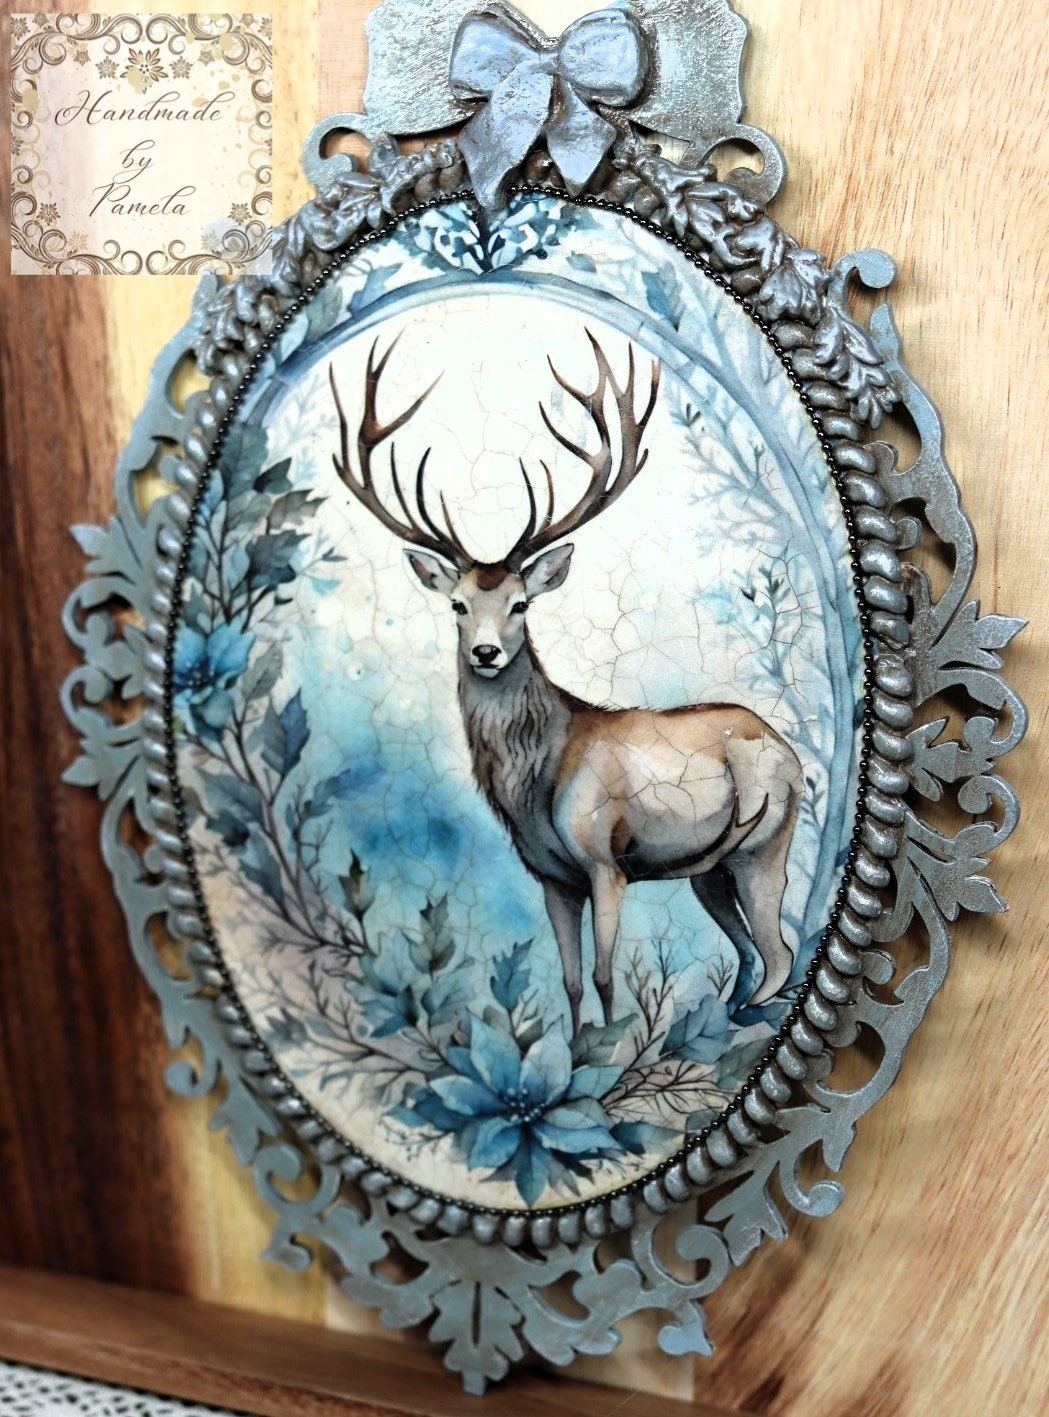 Handcrafted, Mixed Media, Shabby Chic, Decoupage, Plaque, Panel, Christmas, Blue Stag, Plaque, Vintage Style, Antique Style, Laser Cut MDF